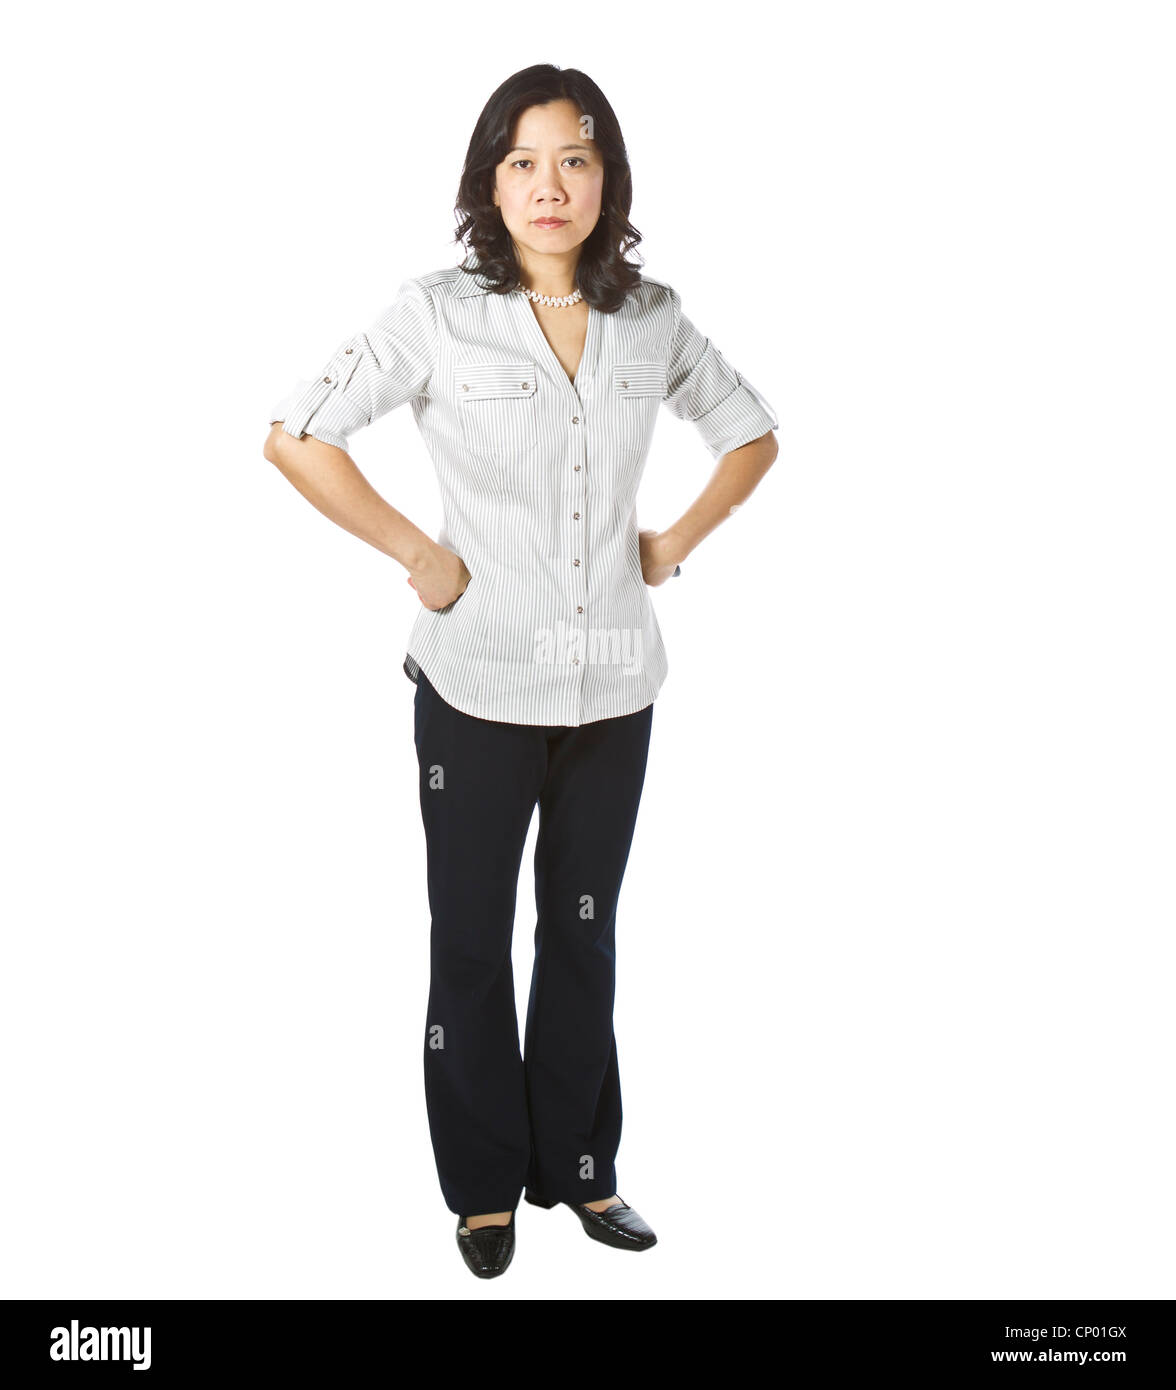 Asian women expressing anger in business causal clothing on white background Stock Photo